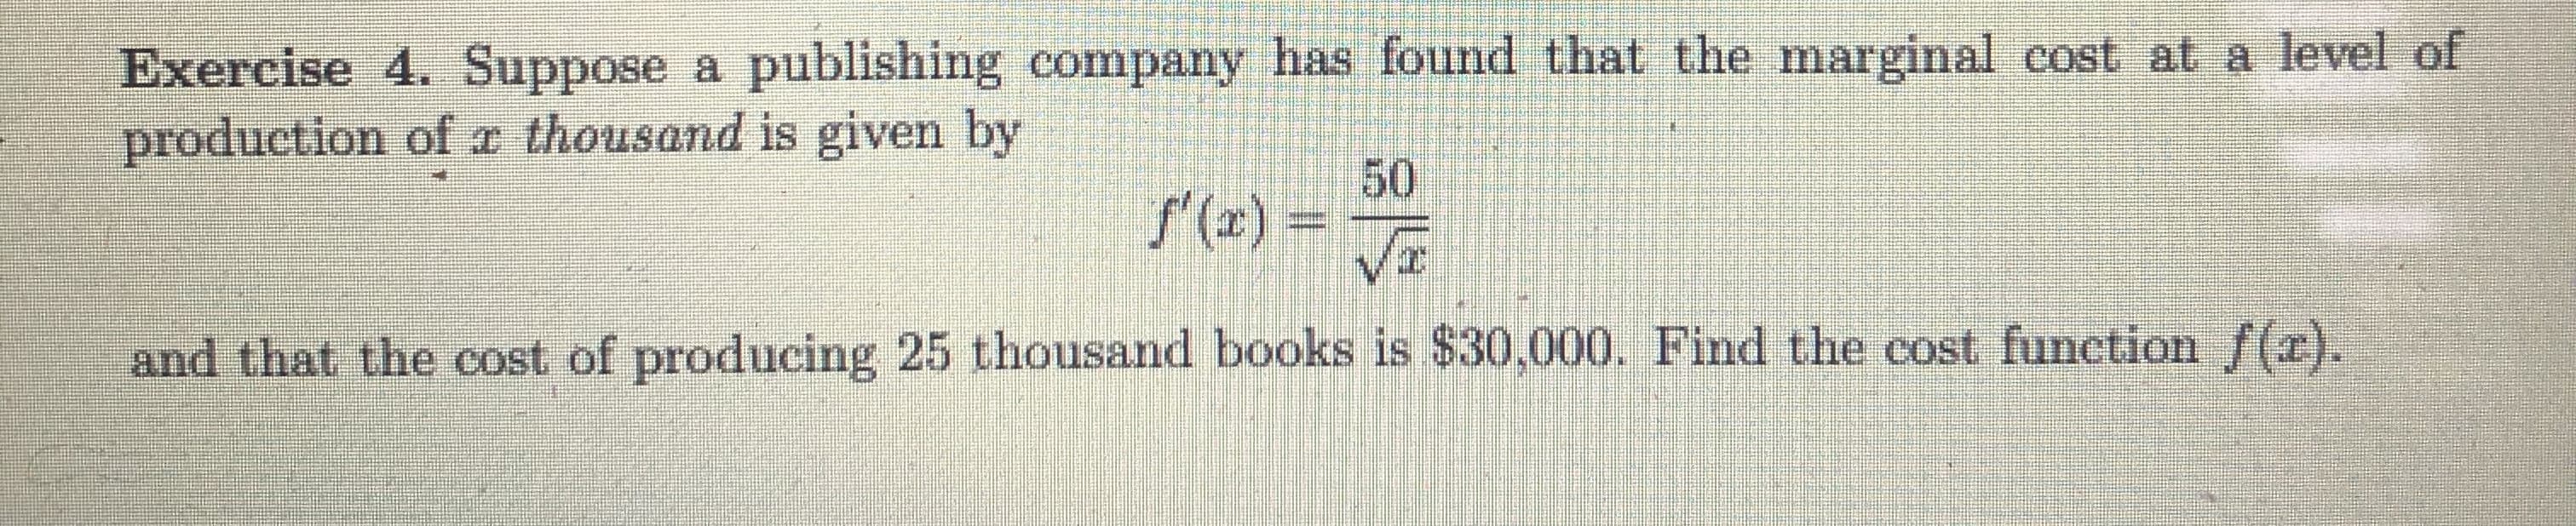 Exercise 4. Suppose a publishing company has found that the marginal cost at a level of
production of x thousand is given by
50
f'(z) =
and that the cost of producing 25 thousand books is $30,000. Find the cost function f(z).
